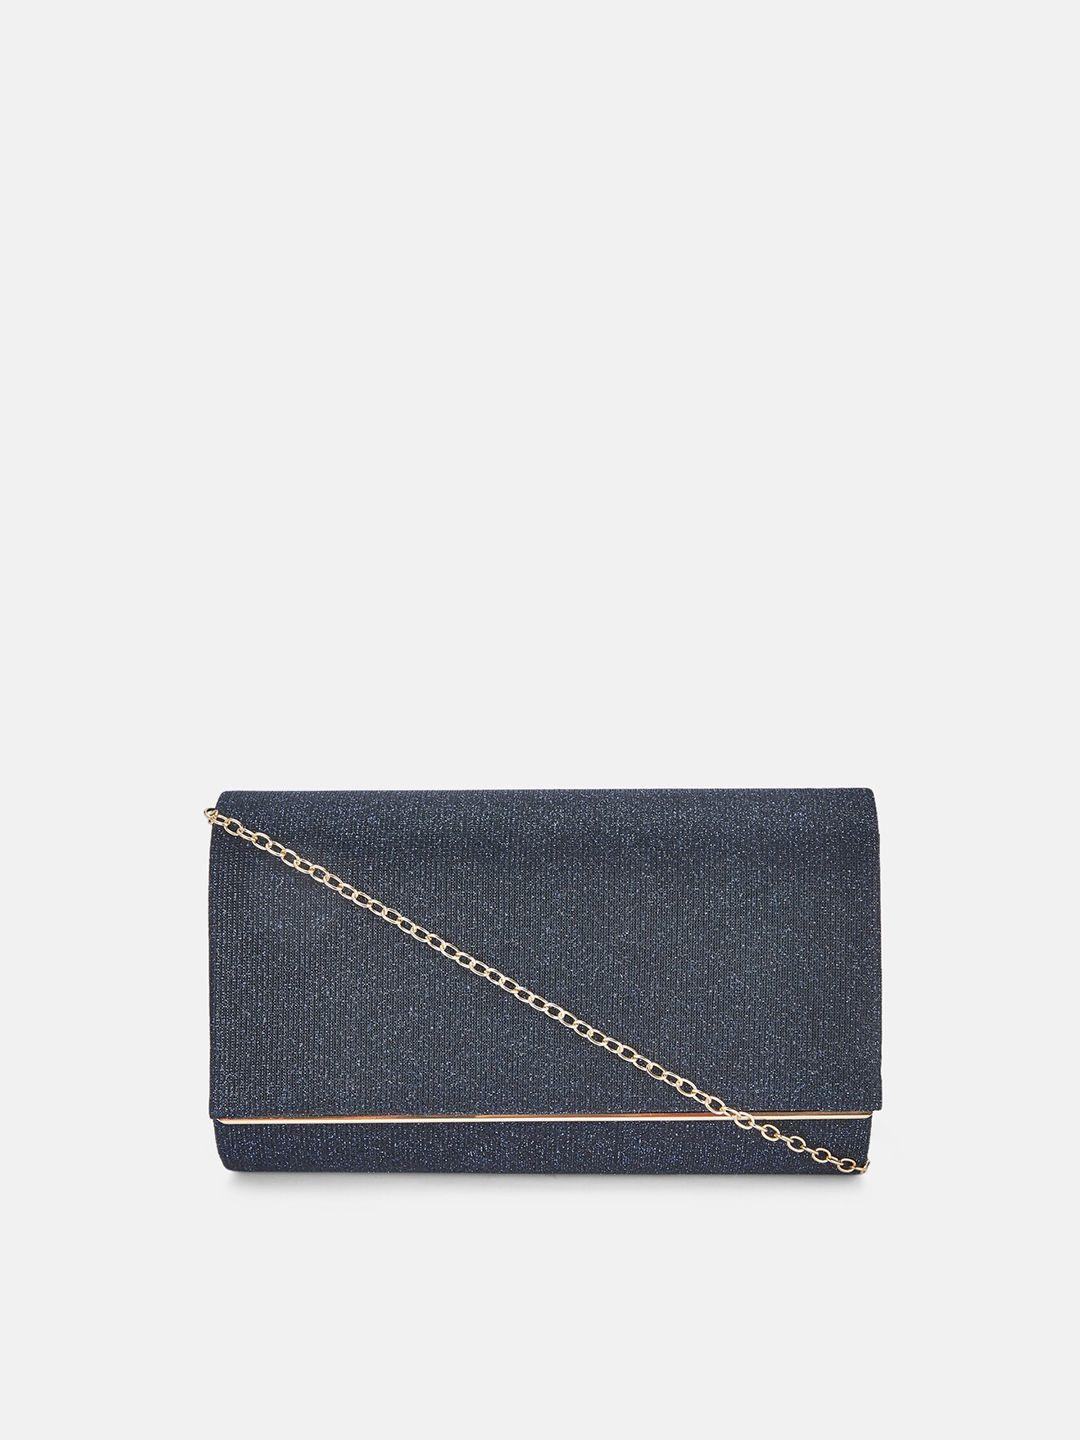 forever glam by pantaloons navy blue envelope clutch